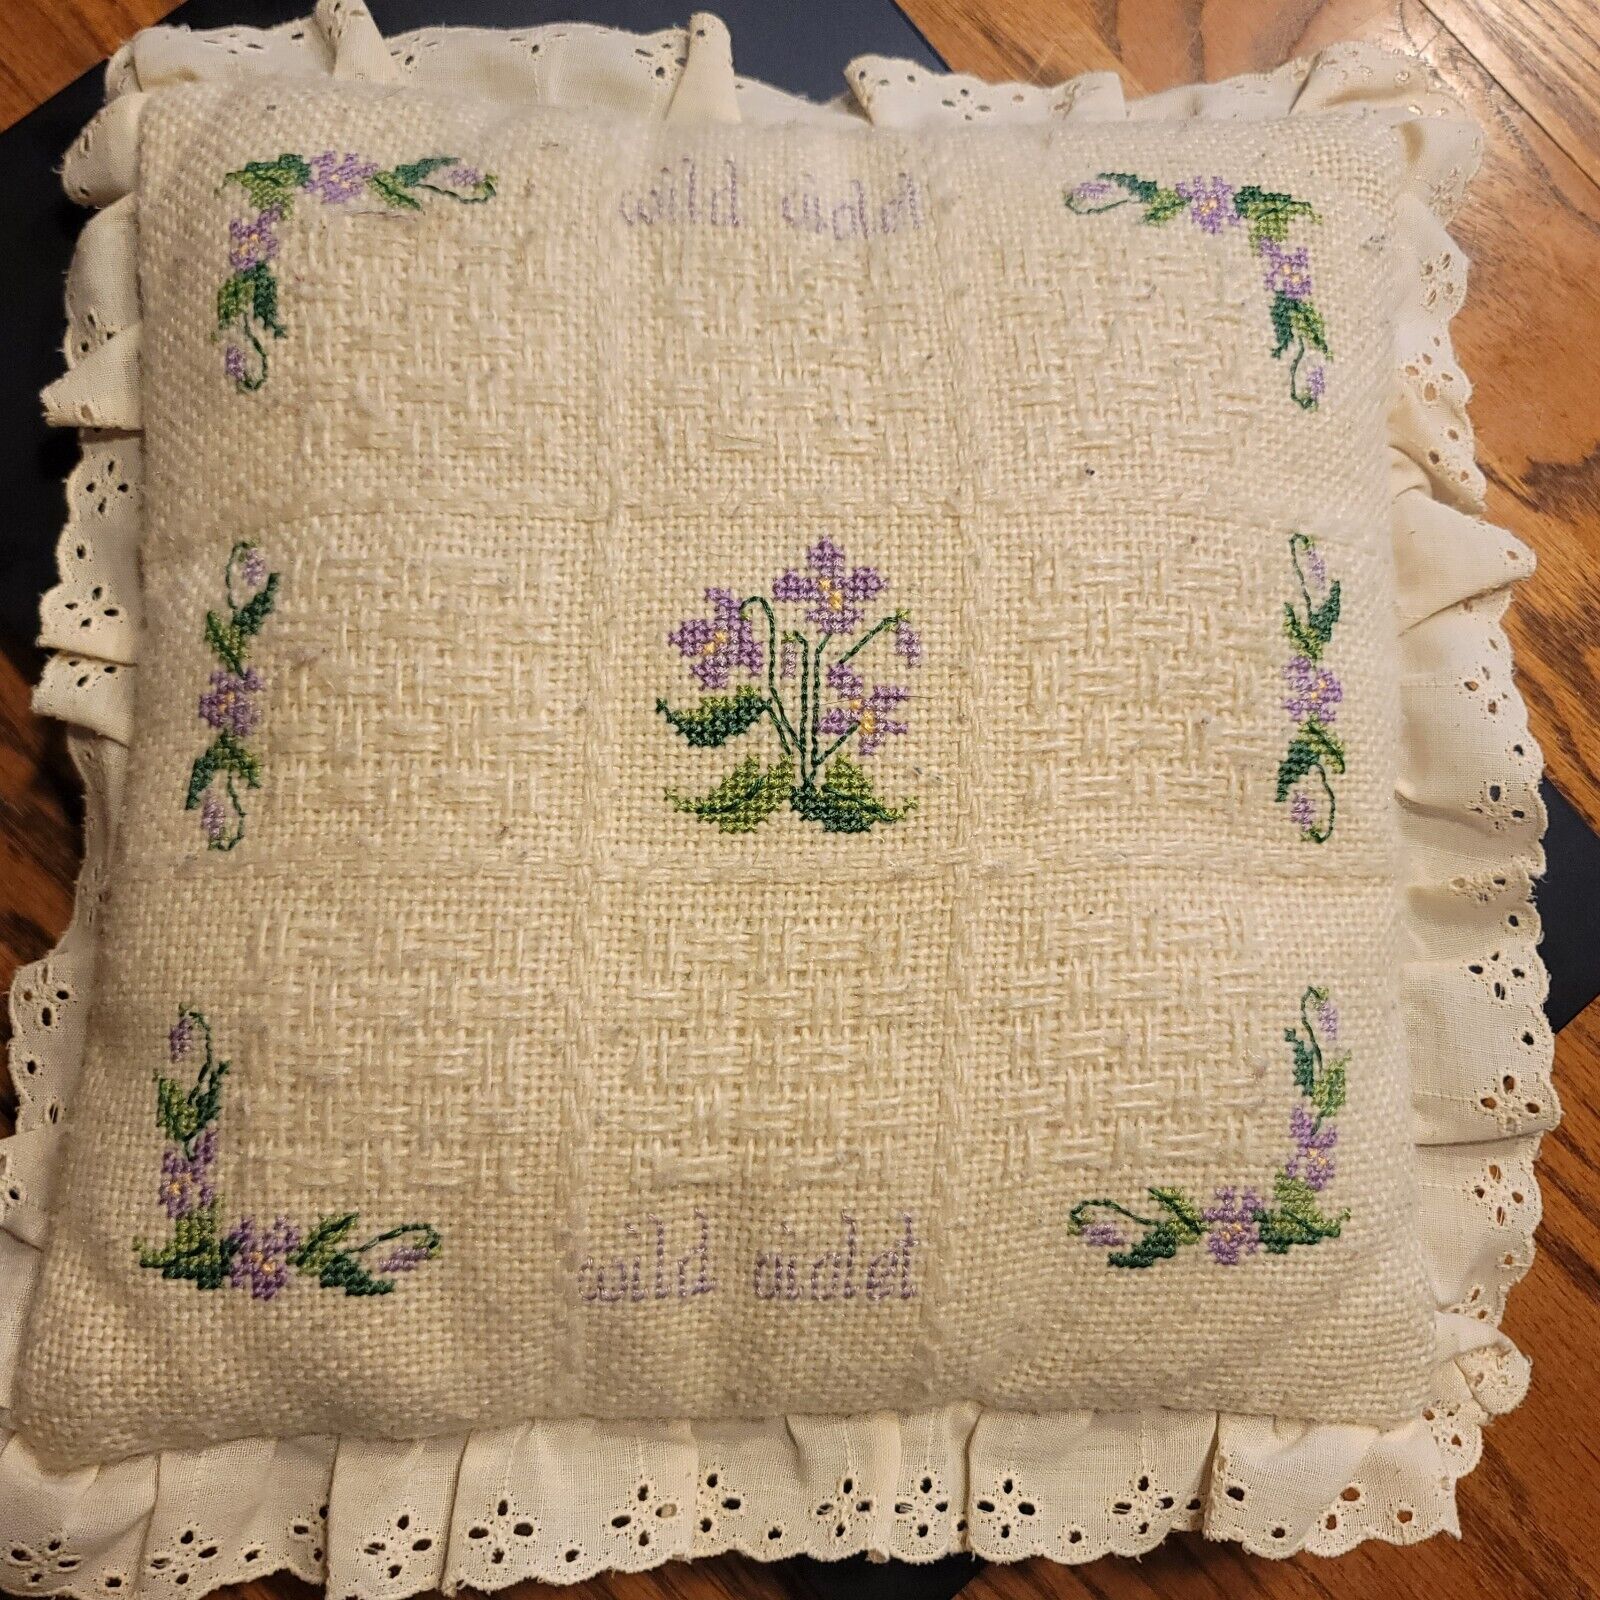 VTG Handmade Stitch Toss Pillow•Wild Violets•Eyelet•Soft•Floral•Country Cottage